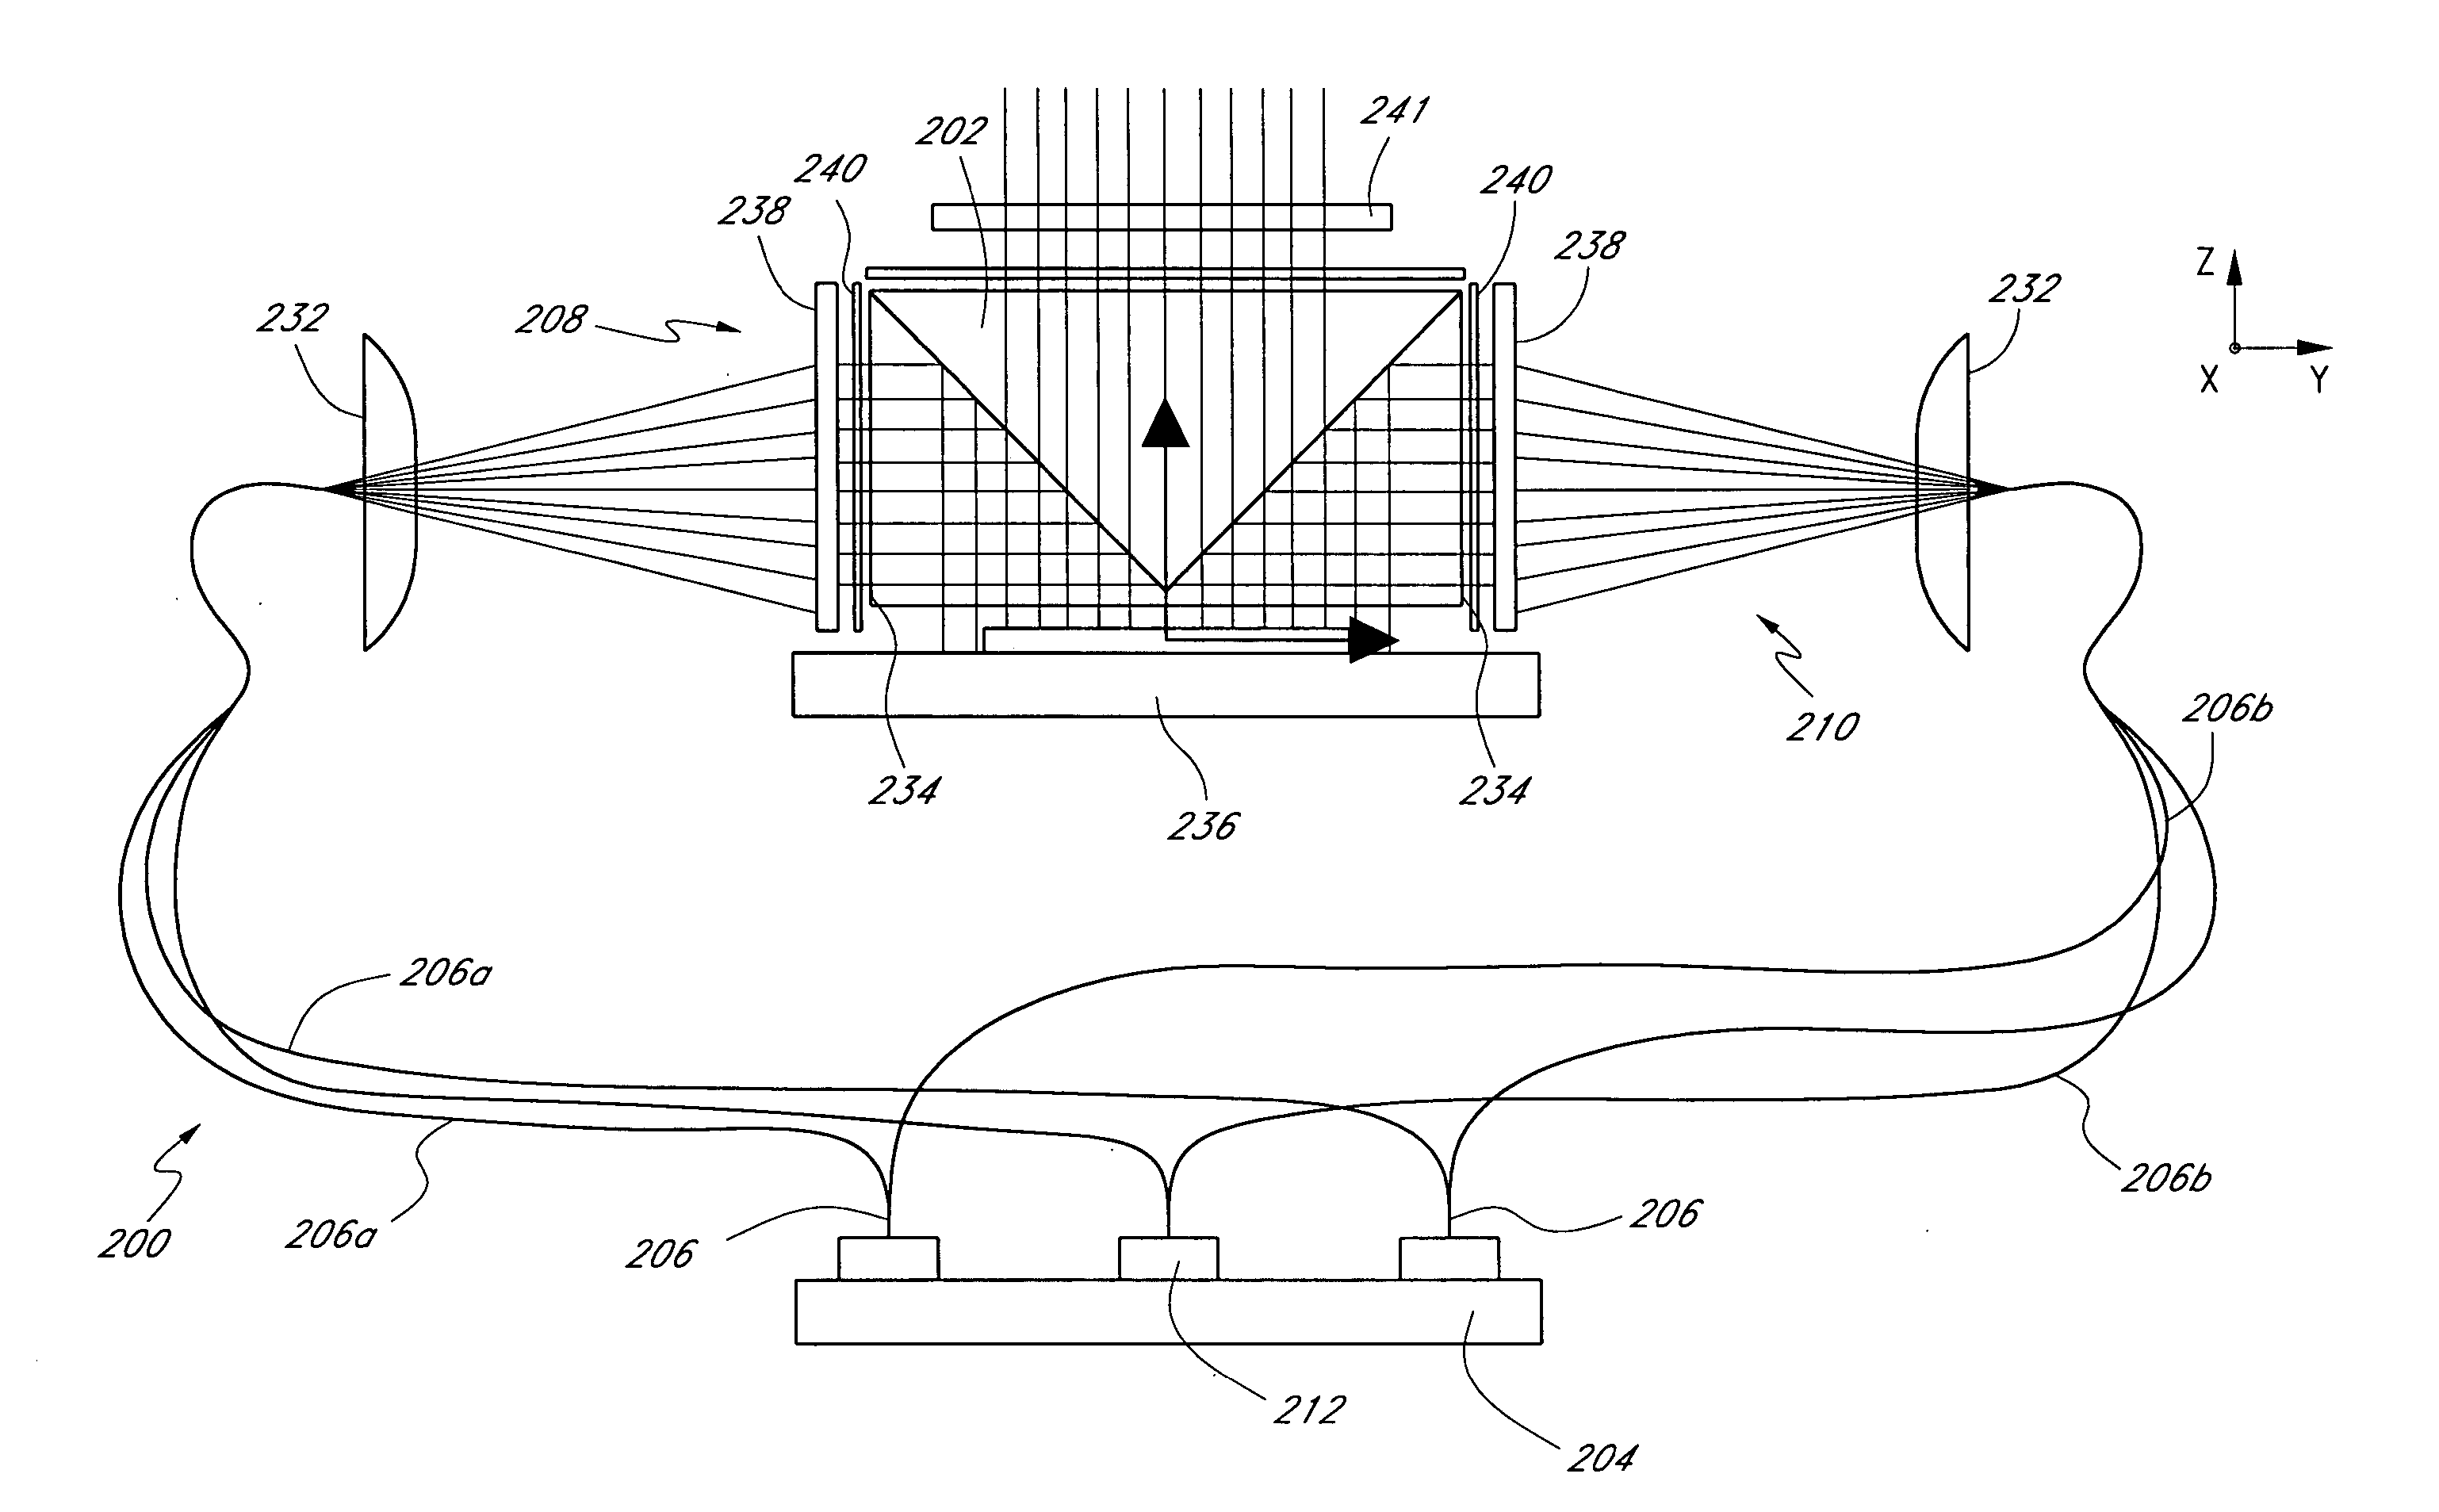 Head mounted display devices